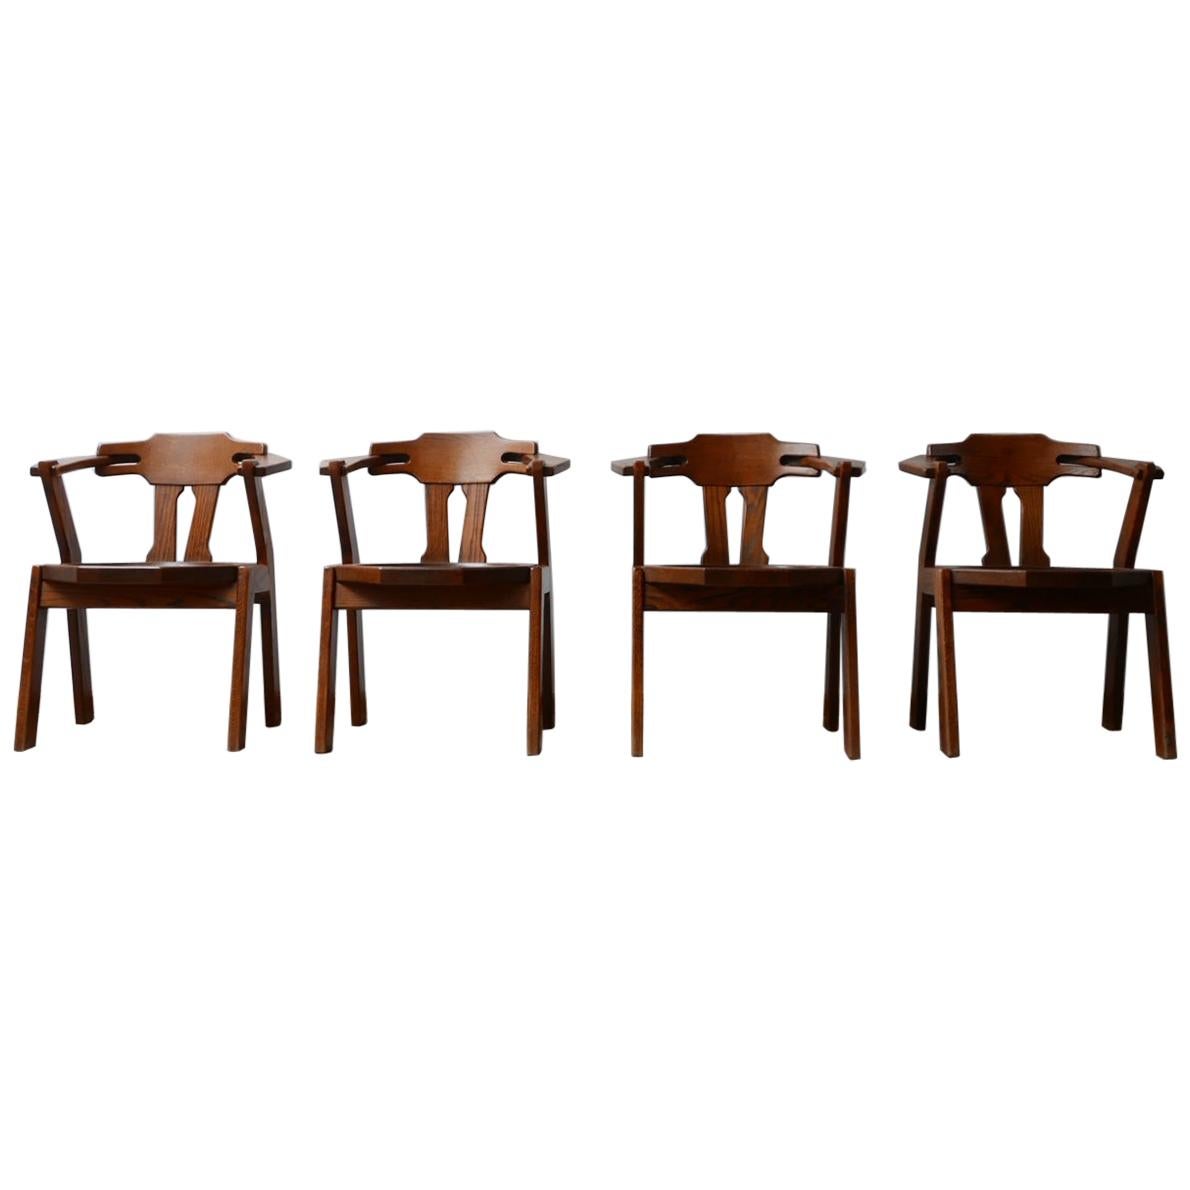 Set of Four Brutalist Mid-Century Oak Dining Chairs '4'